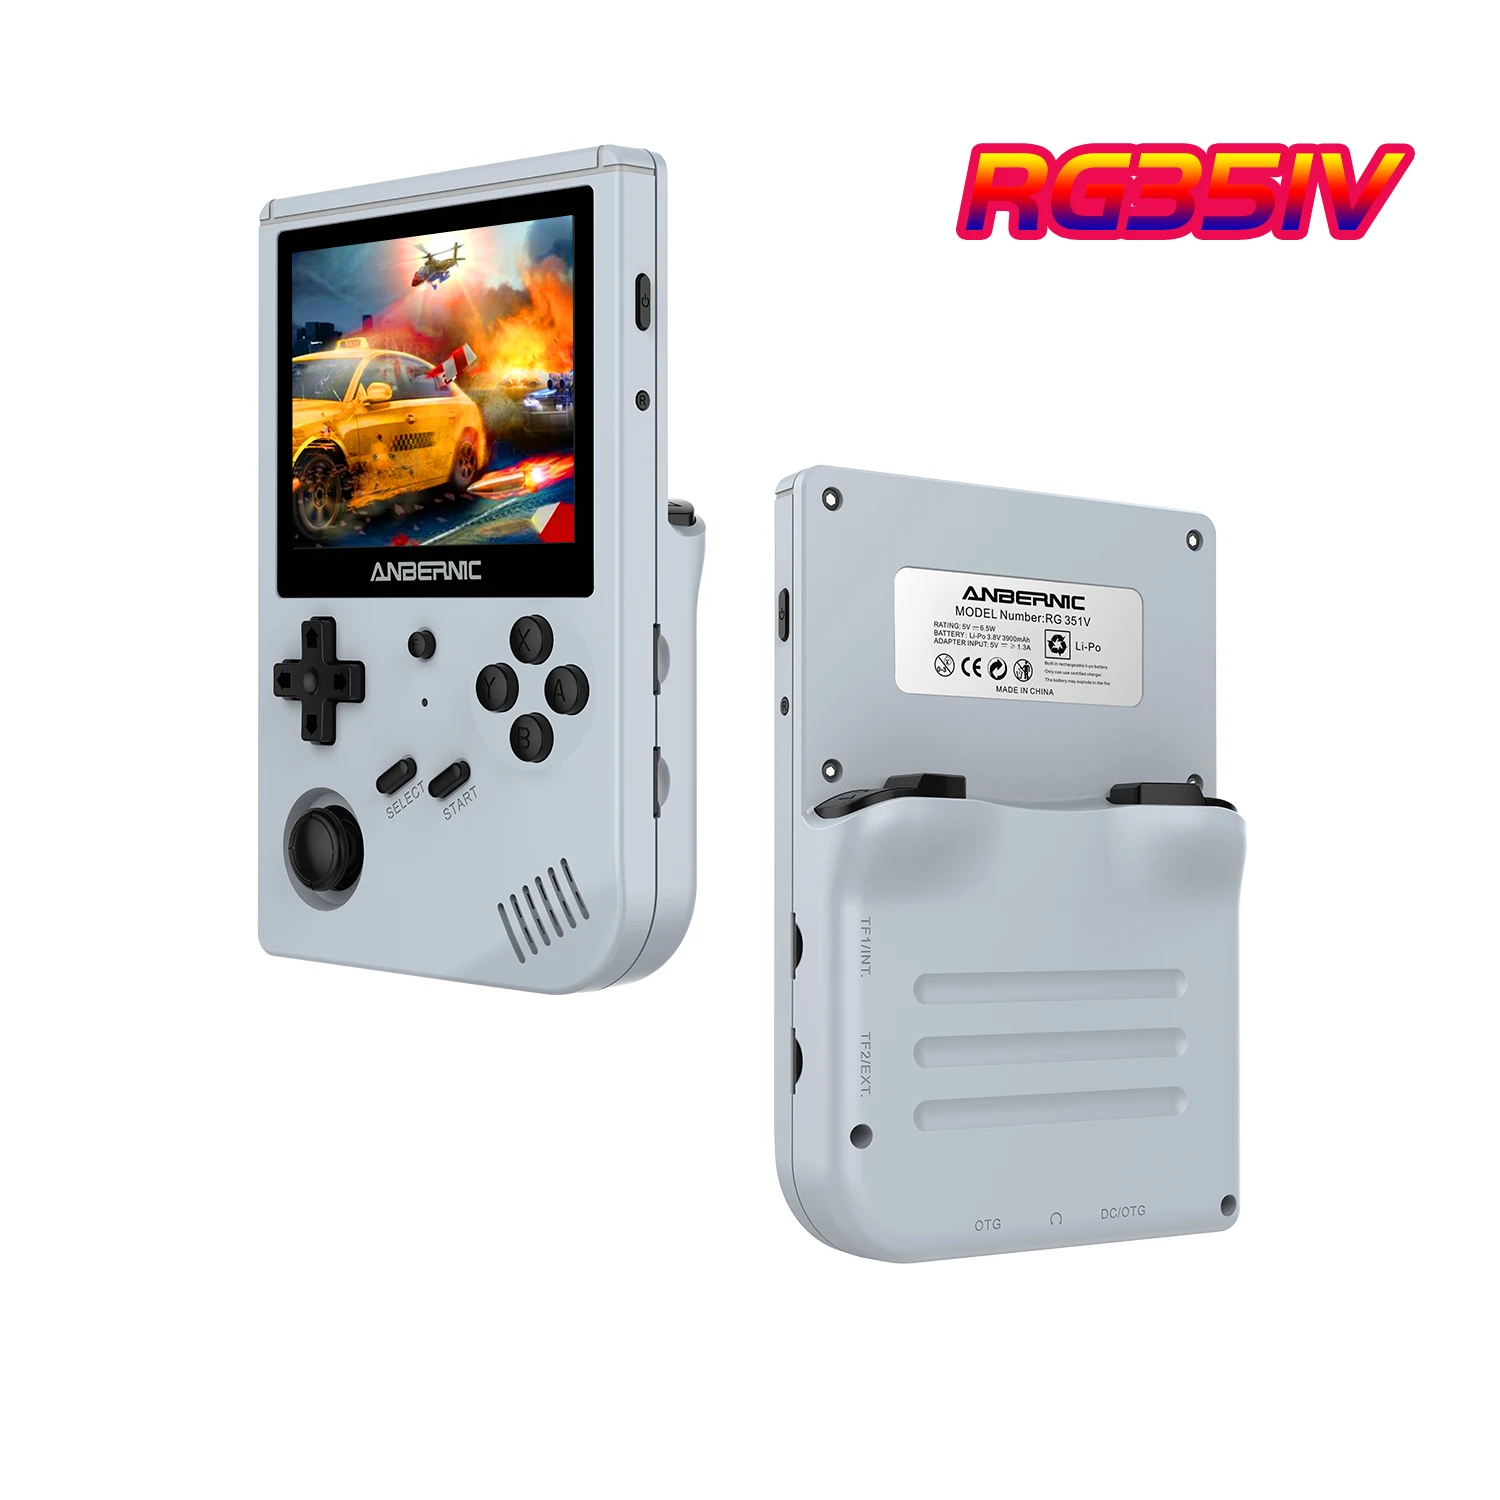 ANBERNIC RG552 144GB 15000+ Games LPDDR4 4GB RAM Android 7.1 Linux WiFi  Online Retro Handheld Video Game Console Tablet for PSP PS1 WII NGC NDS N64  DC 5.36 Inch IPS Screen Sale 